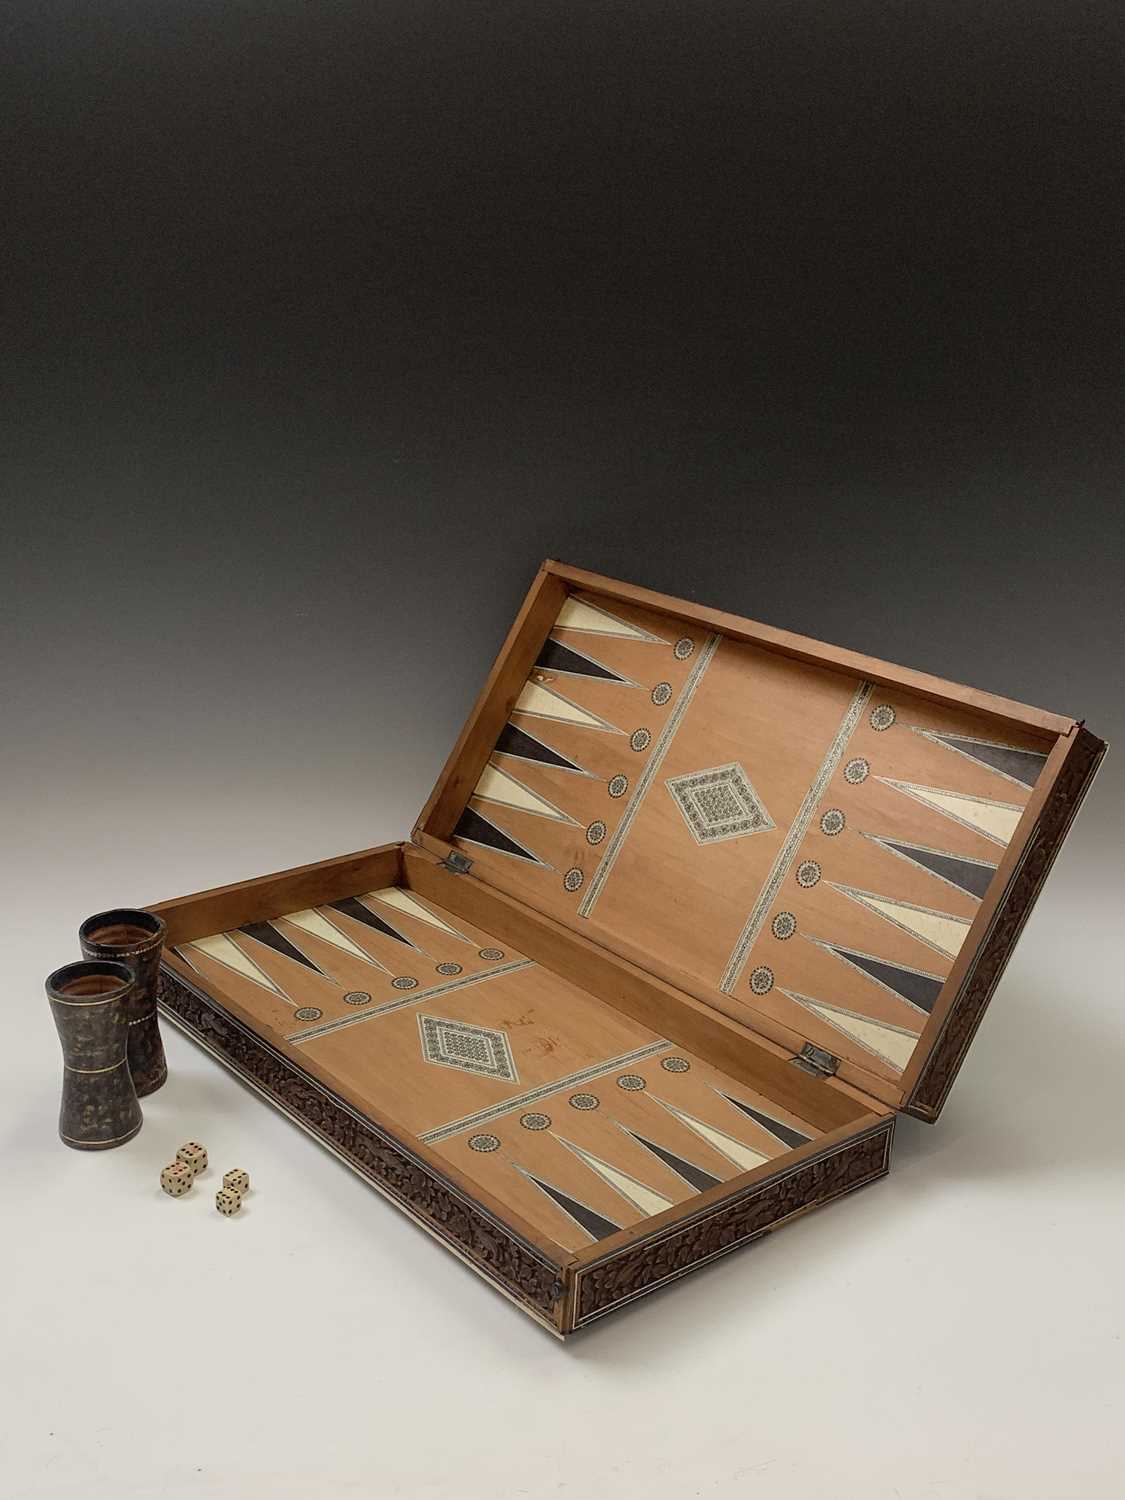 An Anglo-Indian sandalwood games board, 19th century, with ivory and sadeli chess squares within a - Image 2 of 6